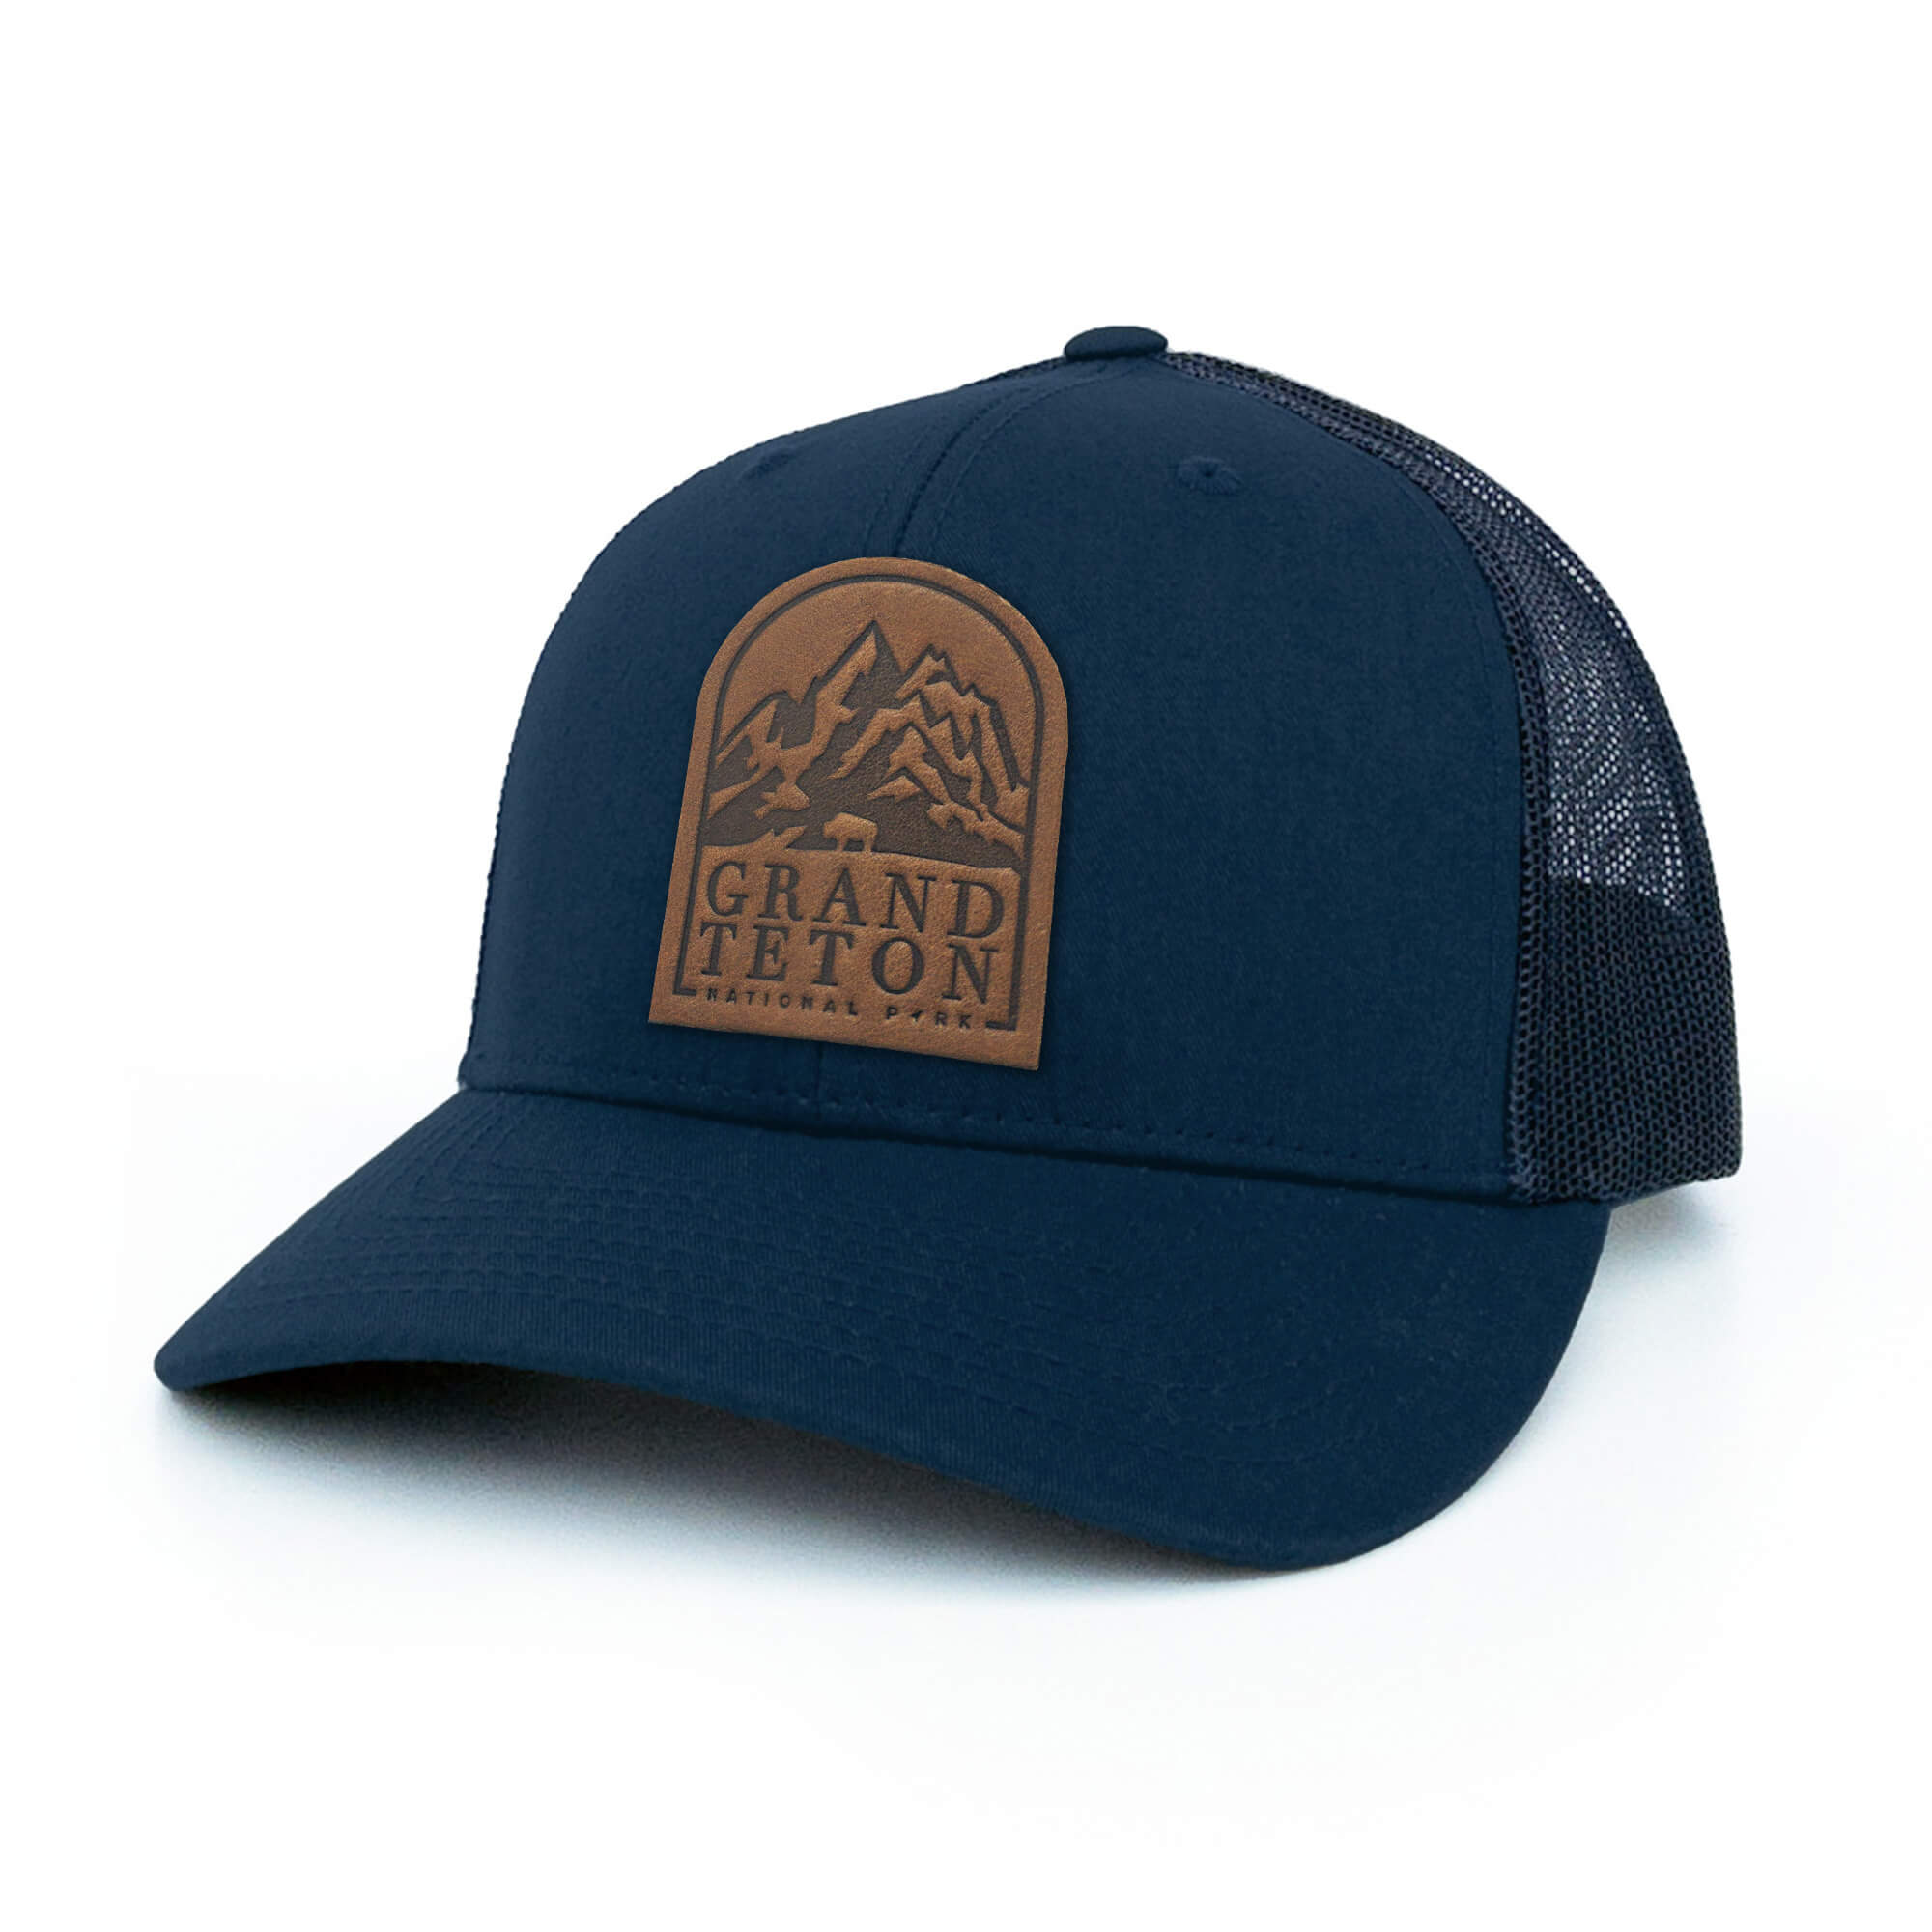 Navy trucker hat with full-grain leather patch of Grand Teton National Park | BLACK-007-003, CHARC-007-003, NAVY-007-003, HGREY-007-003, MOSS-007-003, BROWN-007-003  Edit alt text